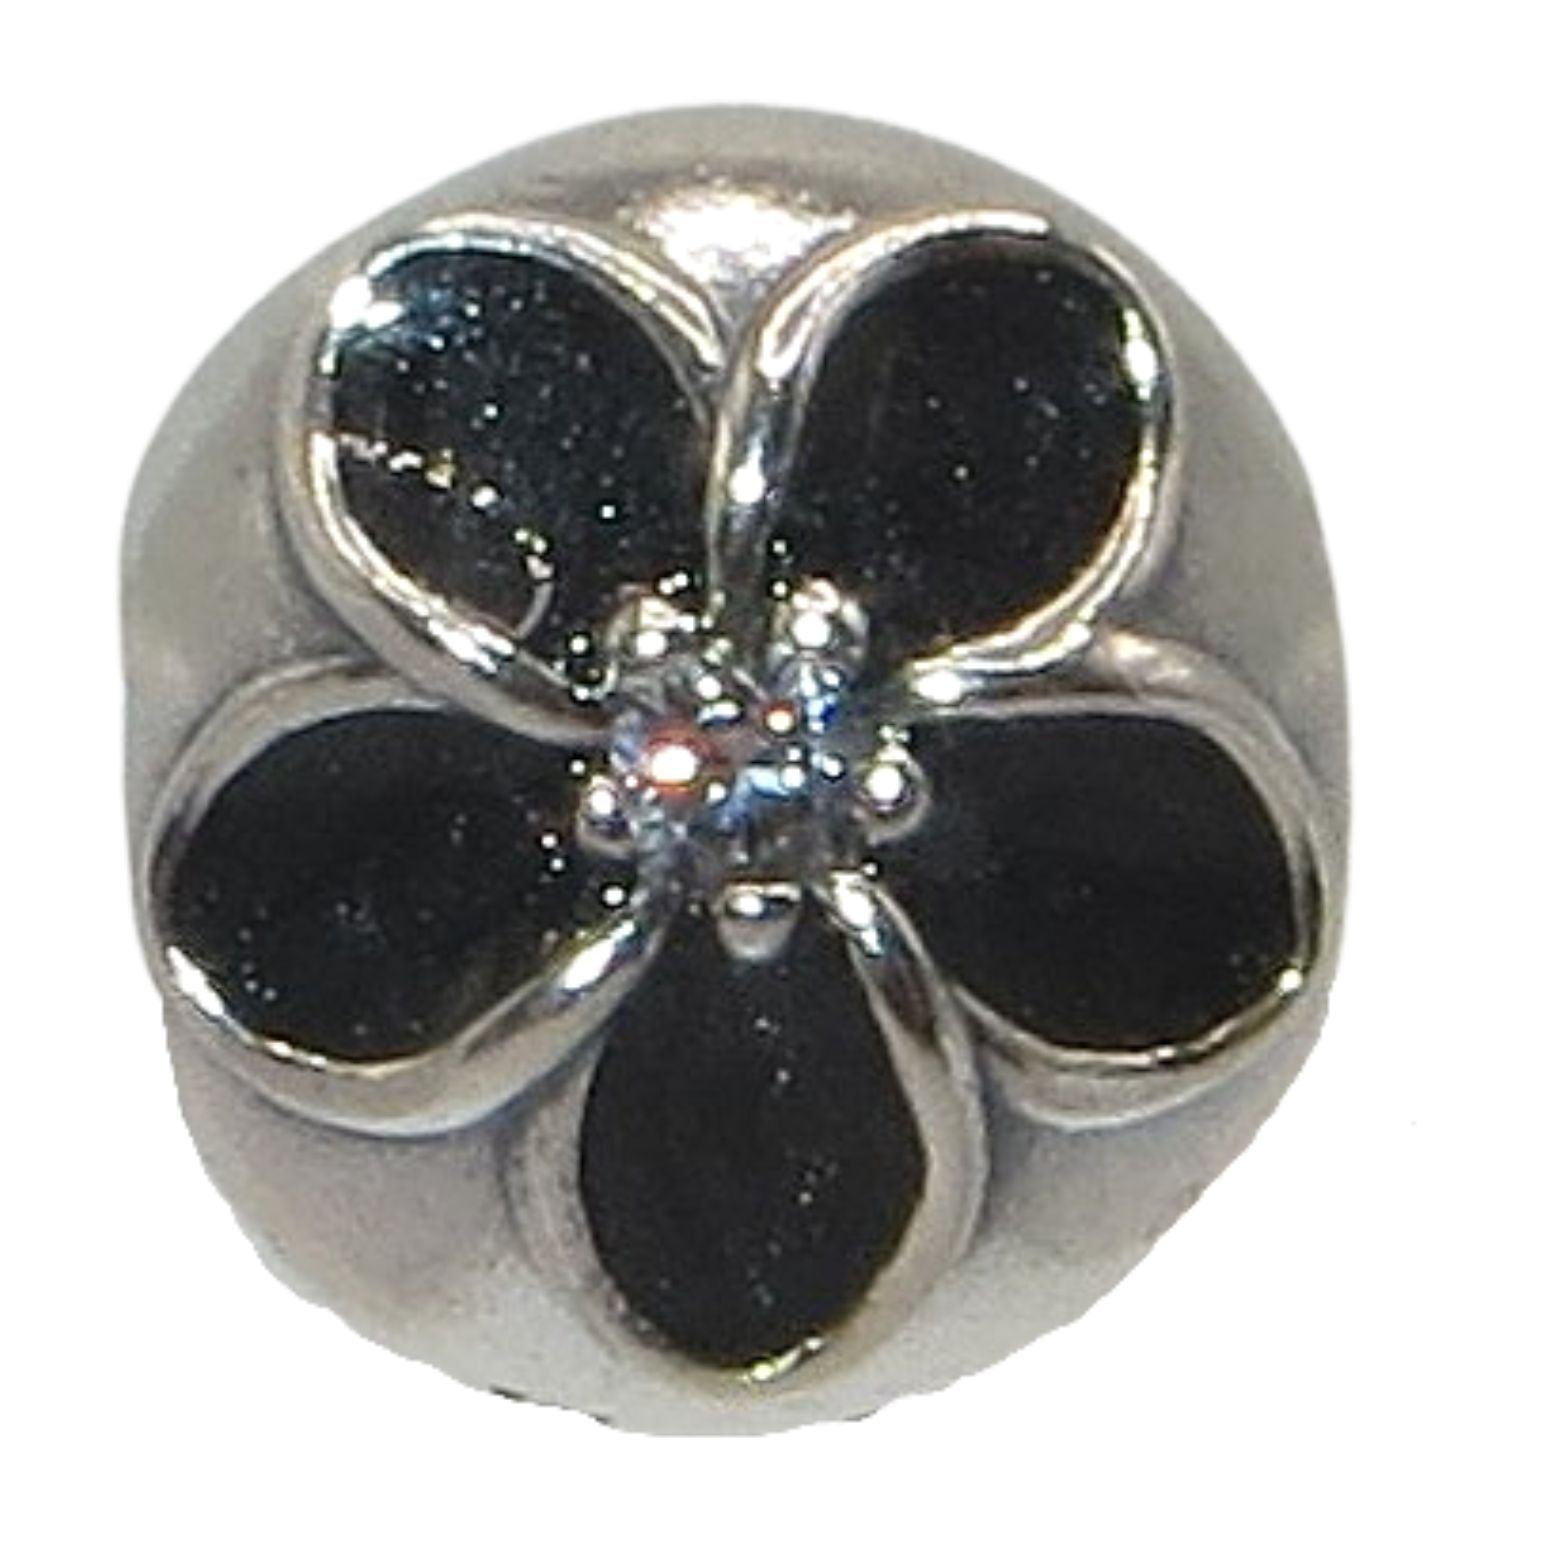 Pandora-791408CZ-Mystic Floral Clip-Woman's Charm-Sterling Silver Mystic Floral Clip with Clear Zirconia and Black Enamel